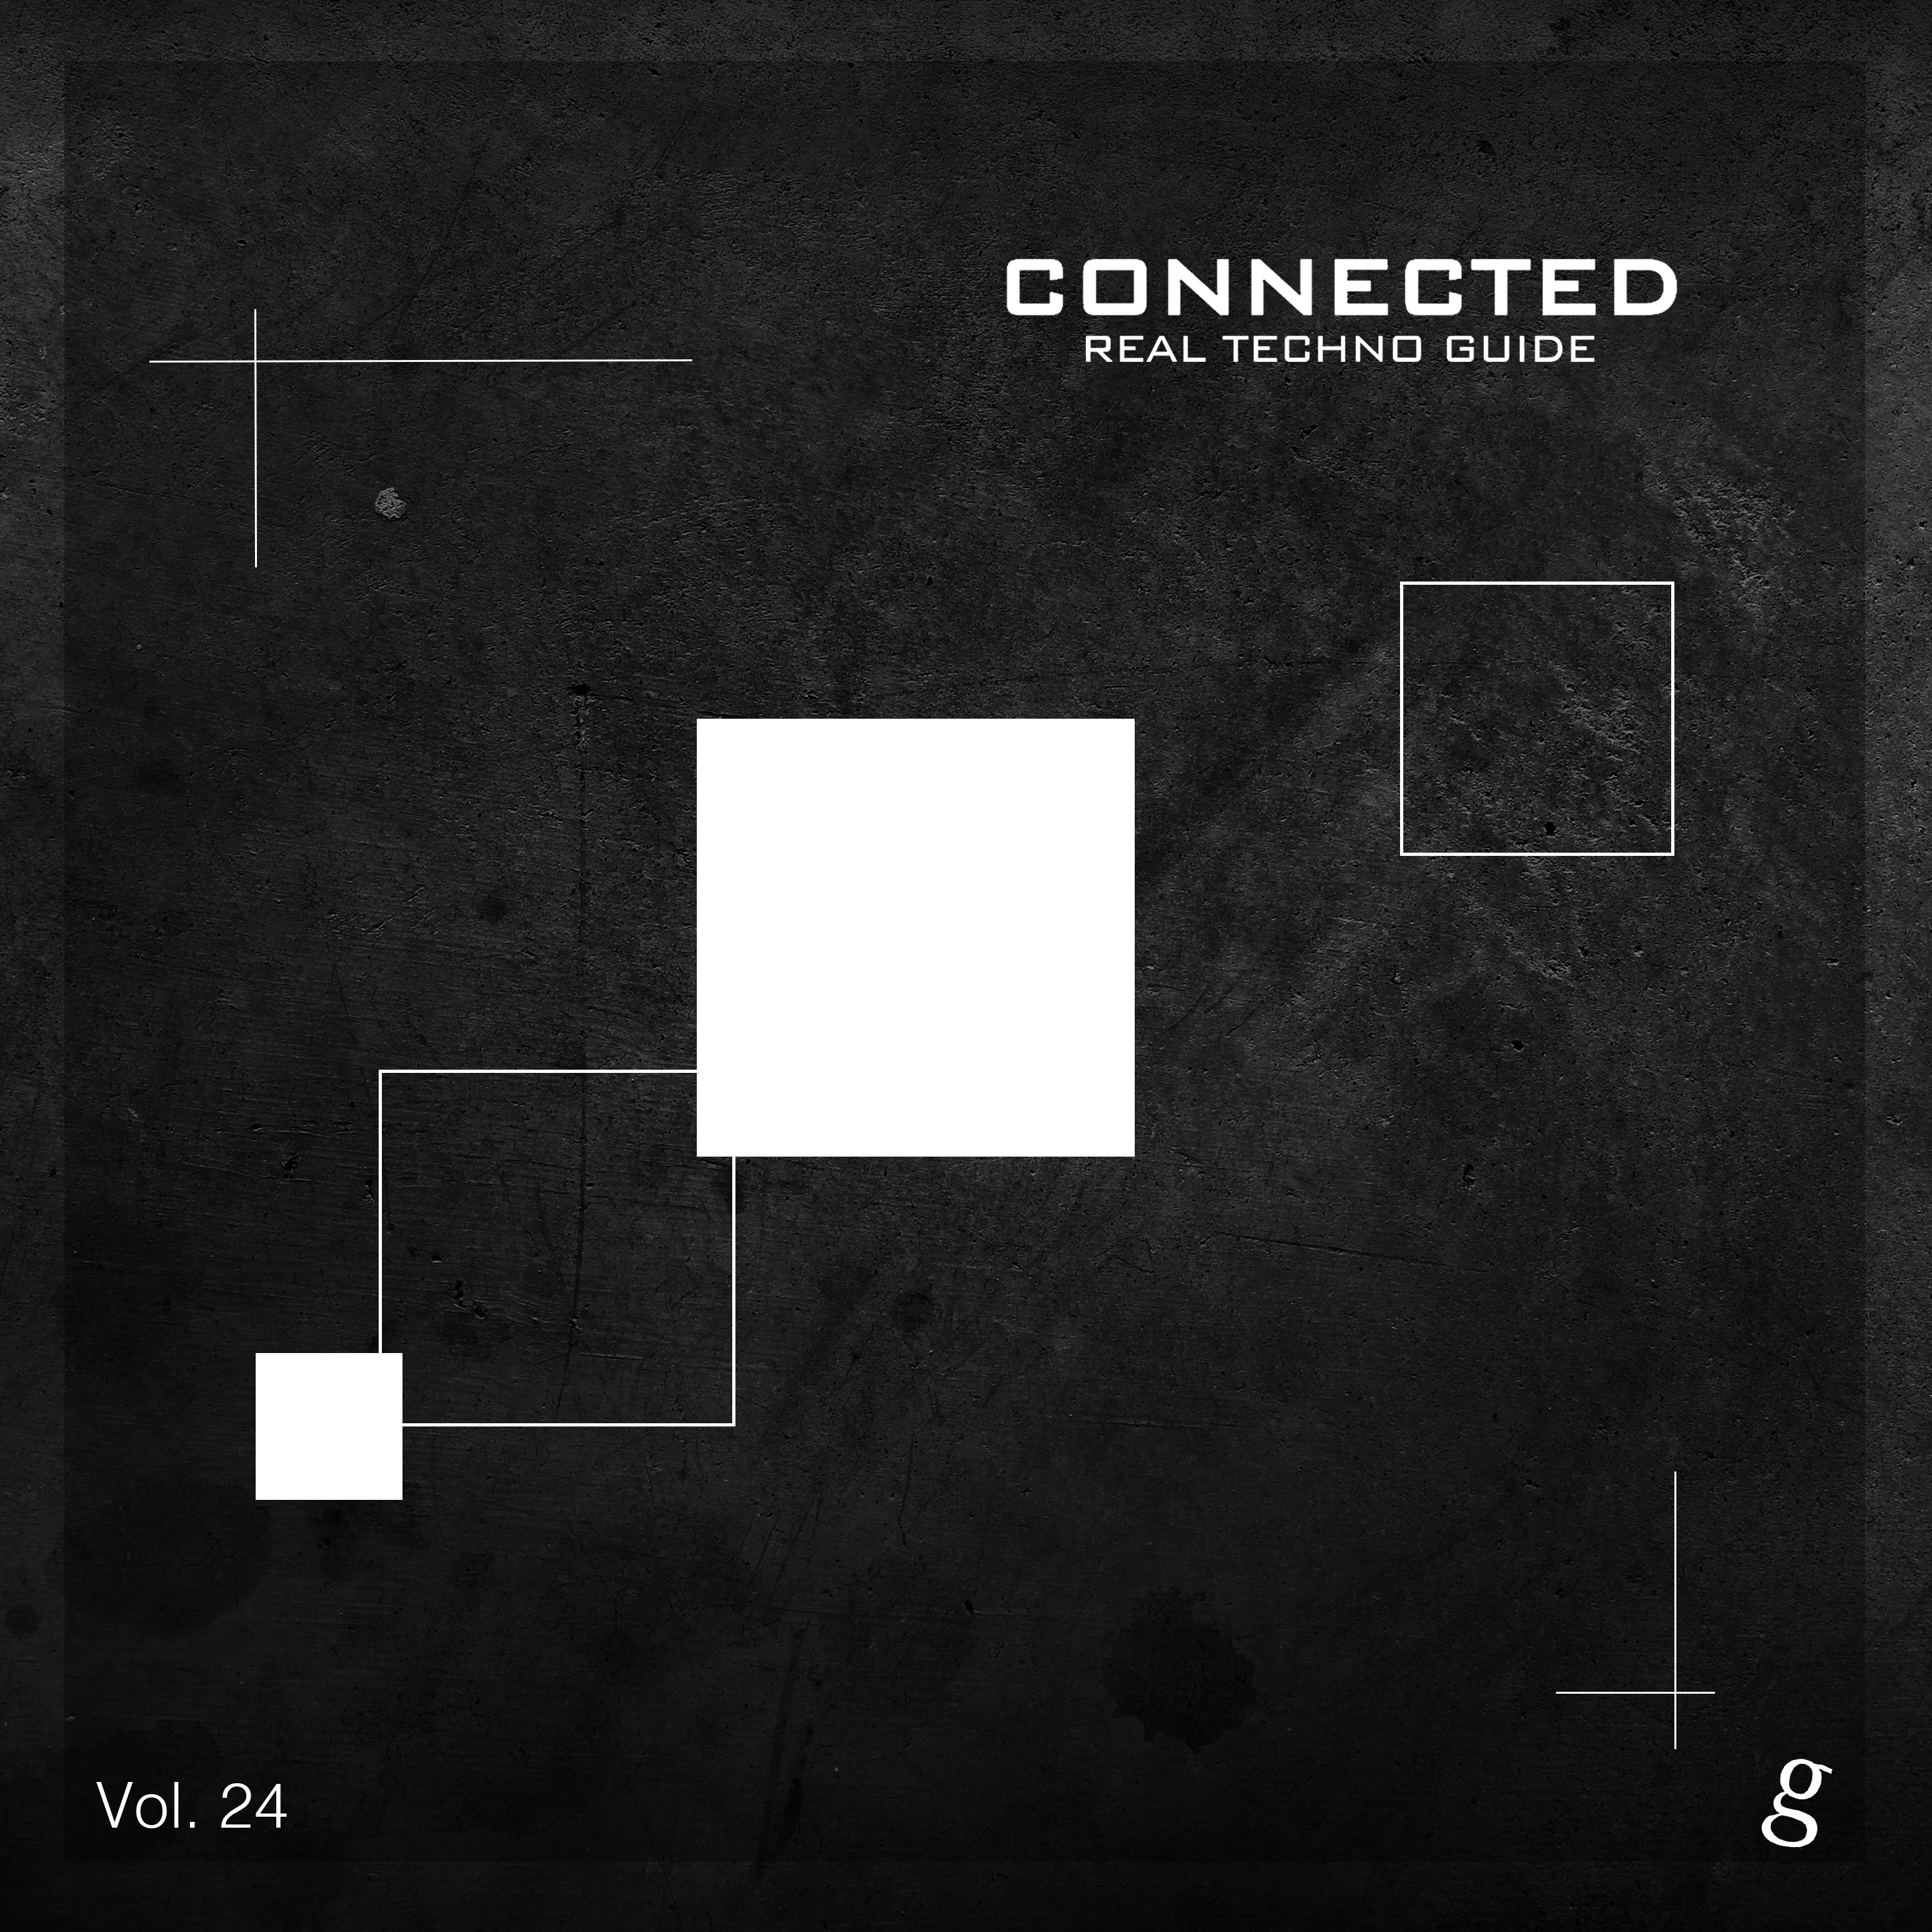 Connected, Vol. 24 - Real Techno Guide